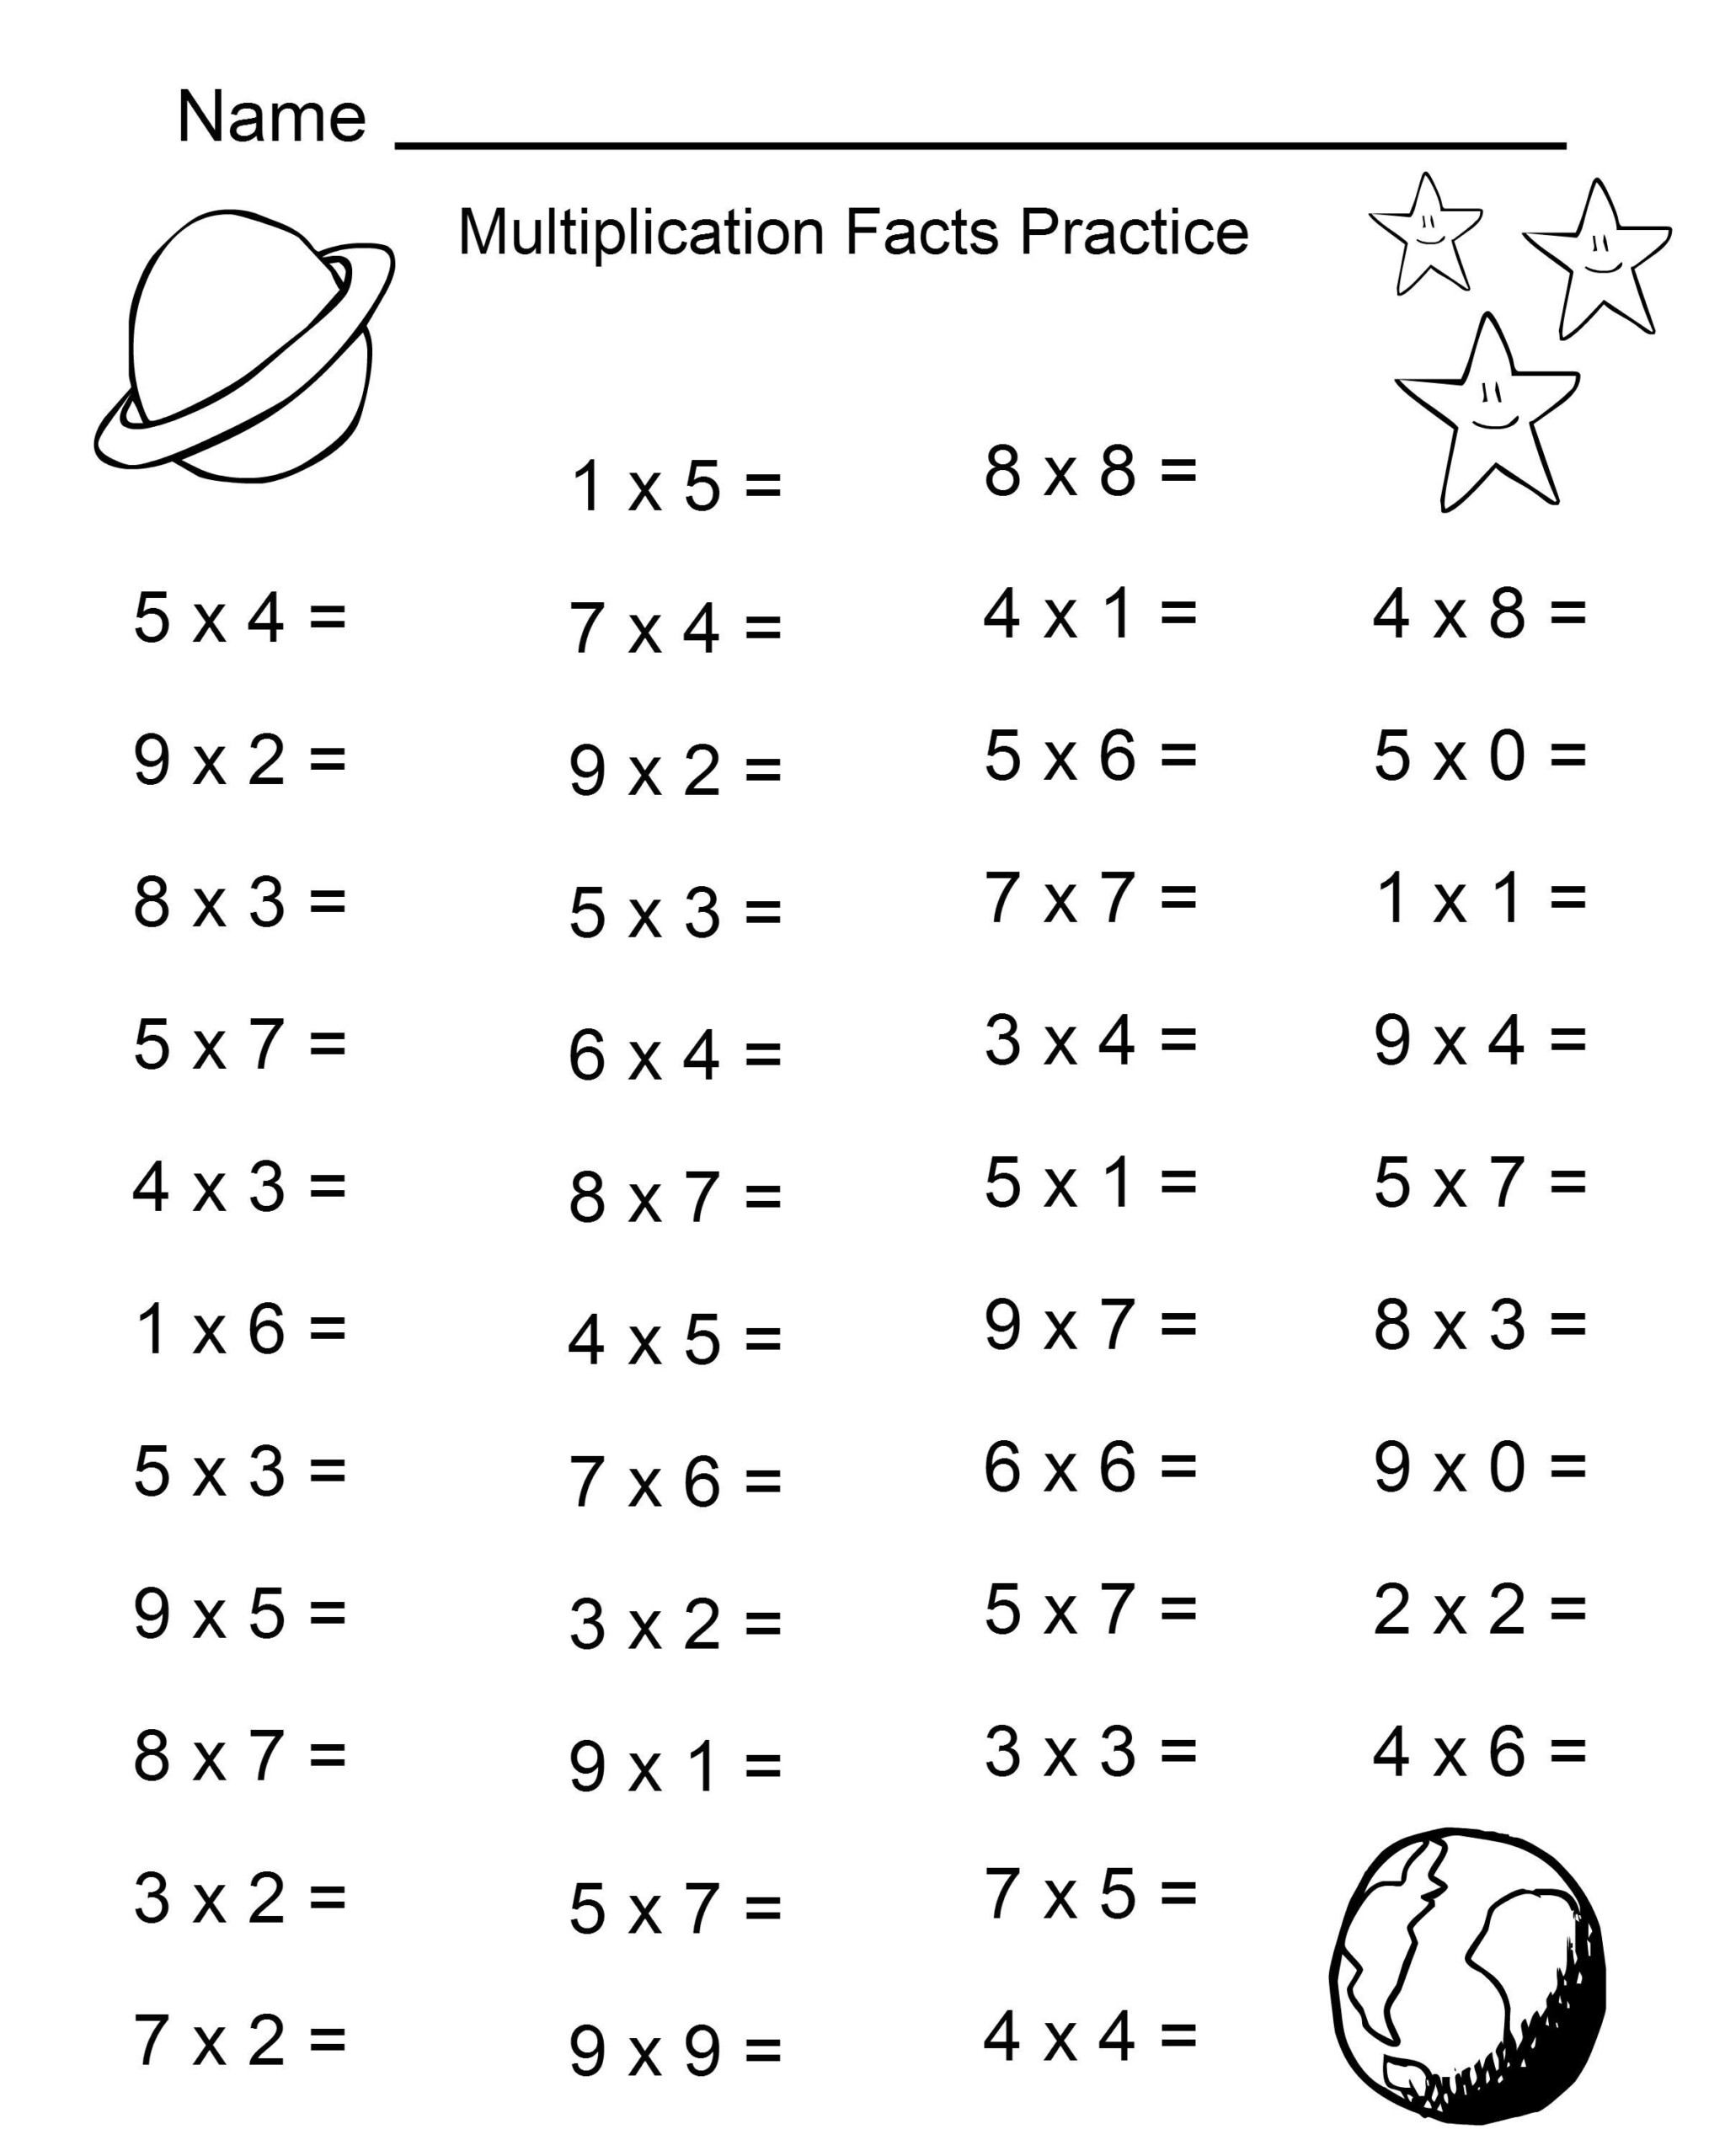 Free Multiplication Facts Practice Worksheets | Printable regarding Multiplication Worksheets 9Th Grade